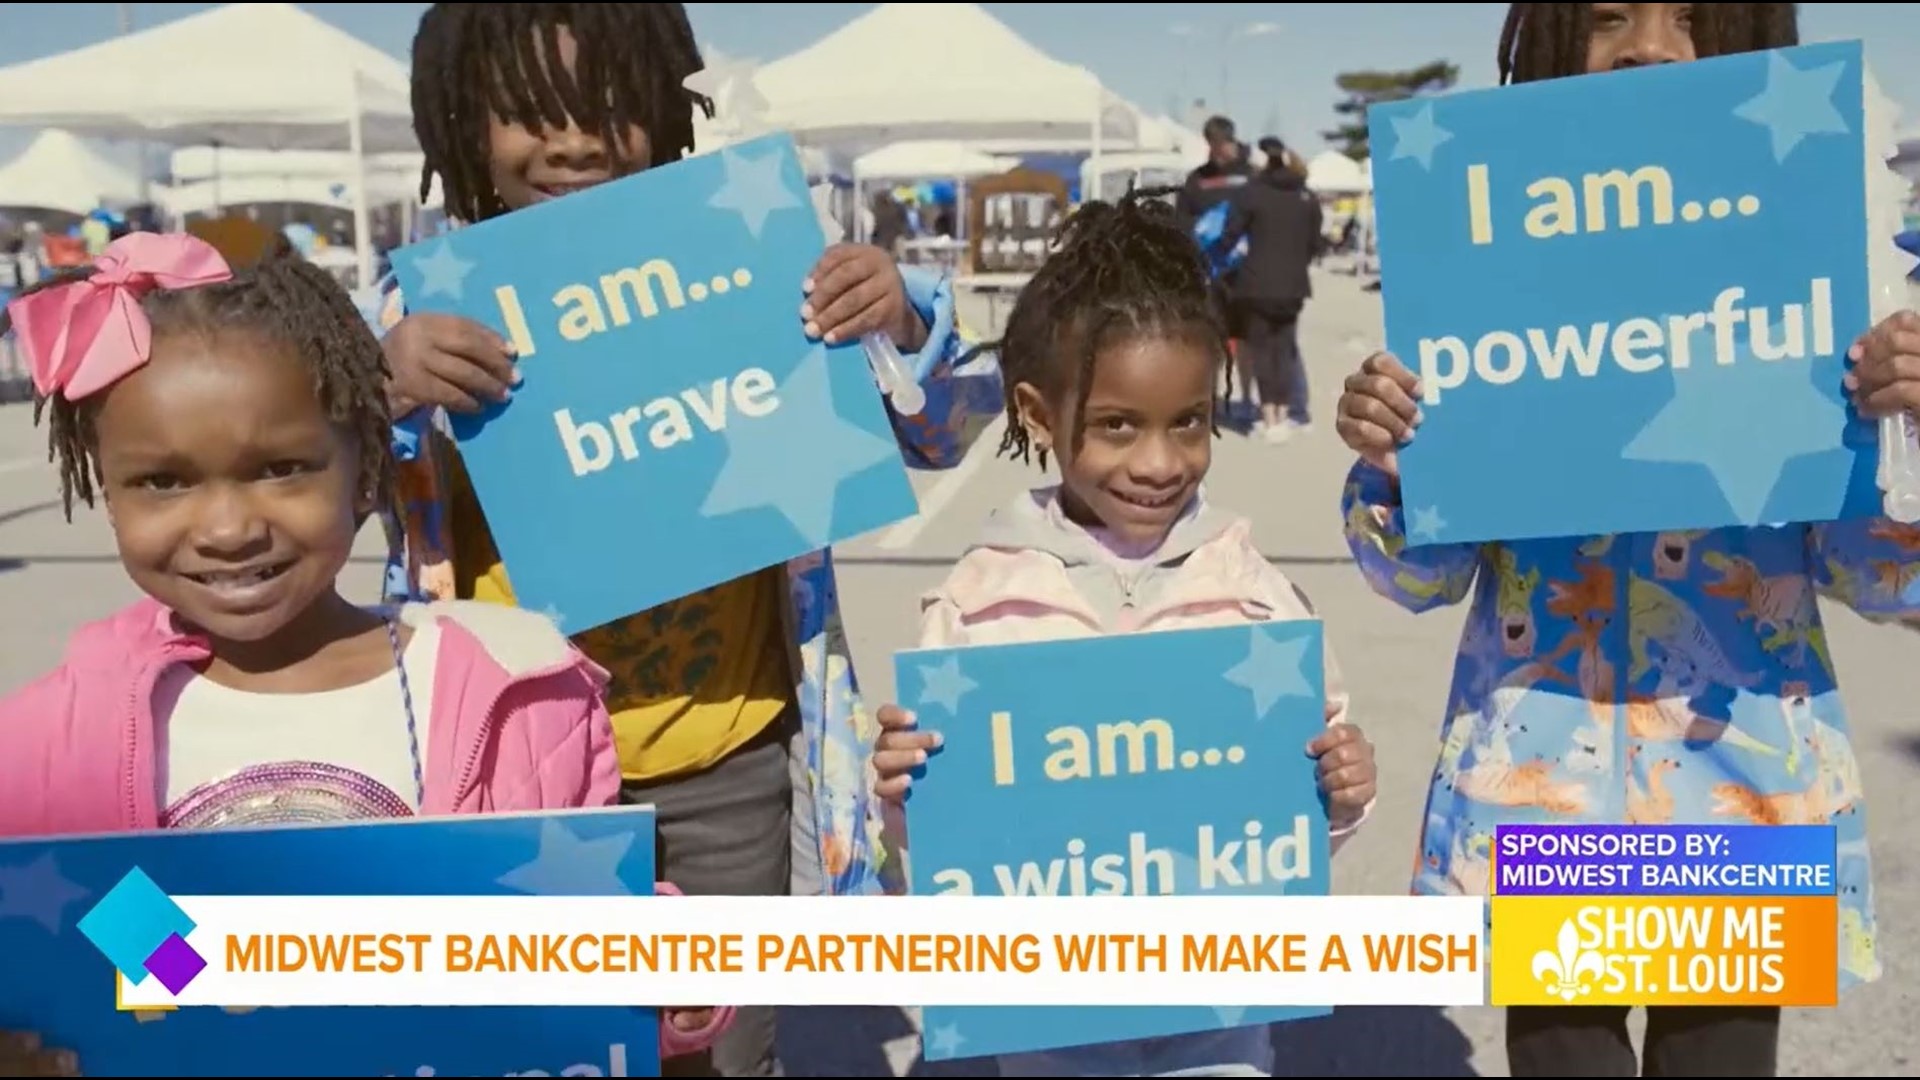 Over the years, Midwest BankCentre has chosen many ways to be involved with Make-A-Wish.